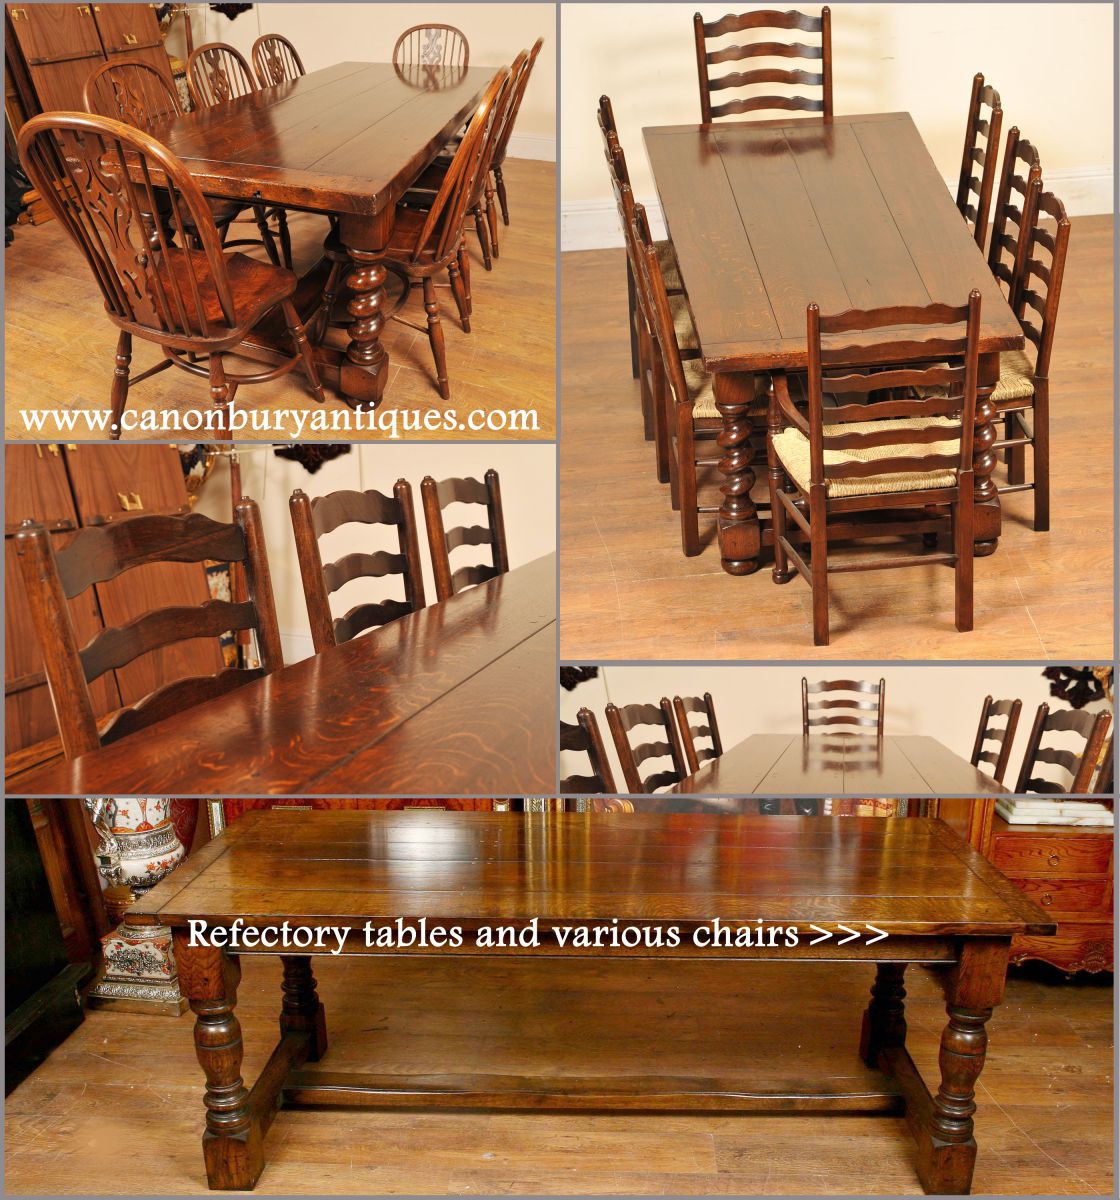 Selection of classic farmhouse tables